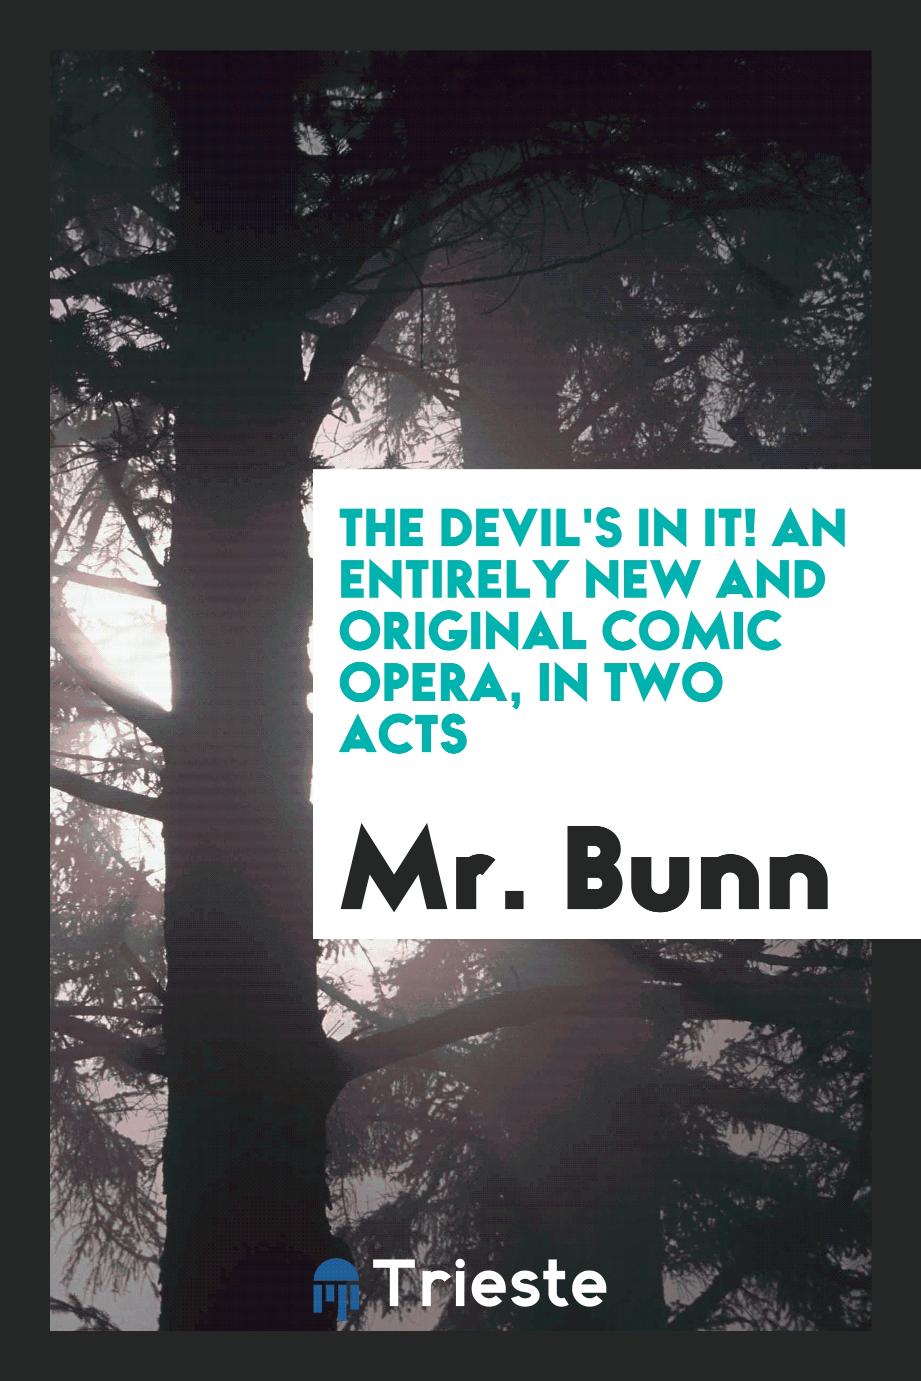 The devil's in it! An entirely new and original comic opera, in two acts